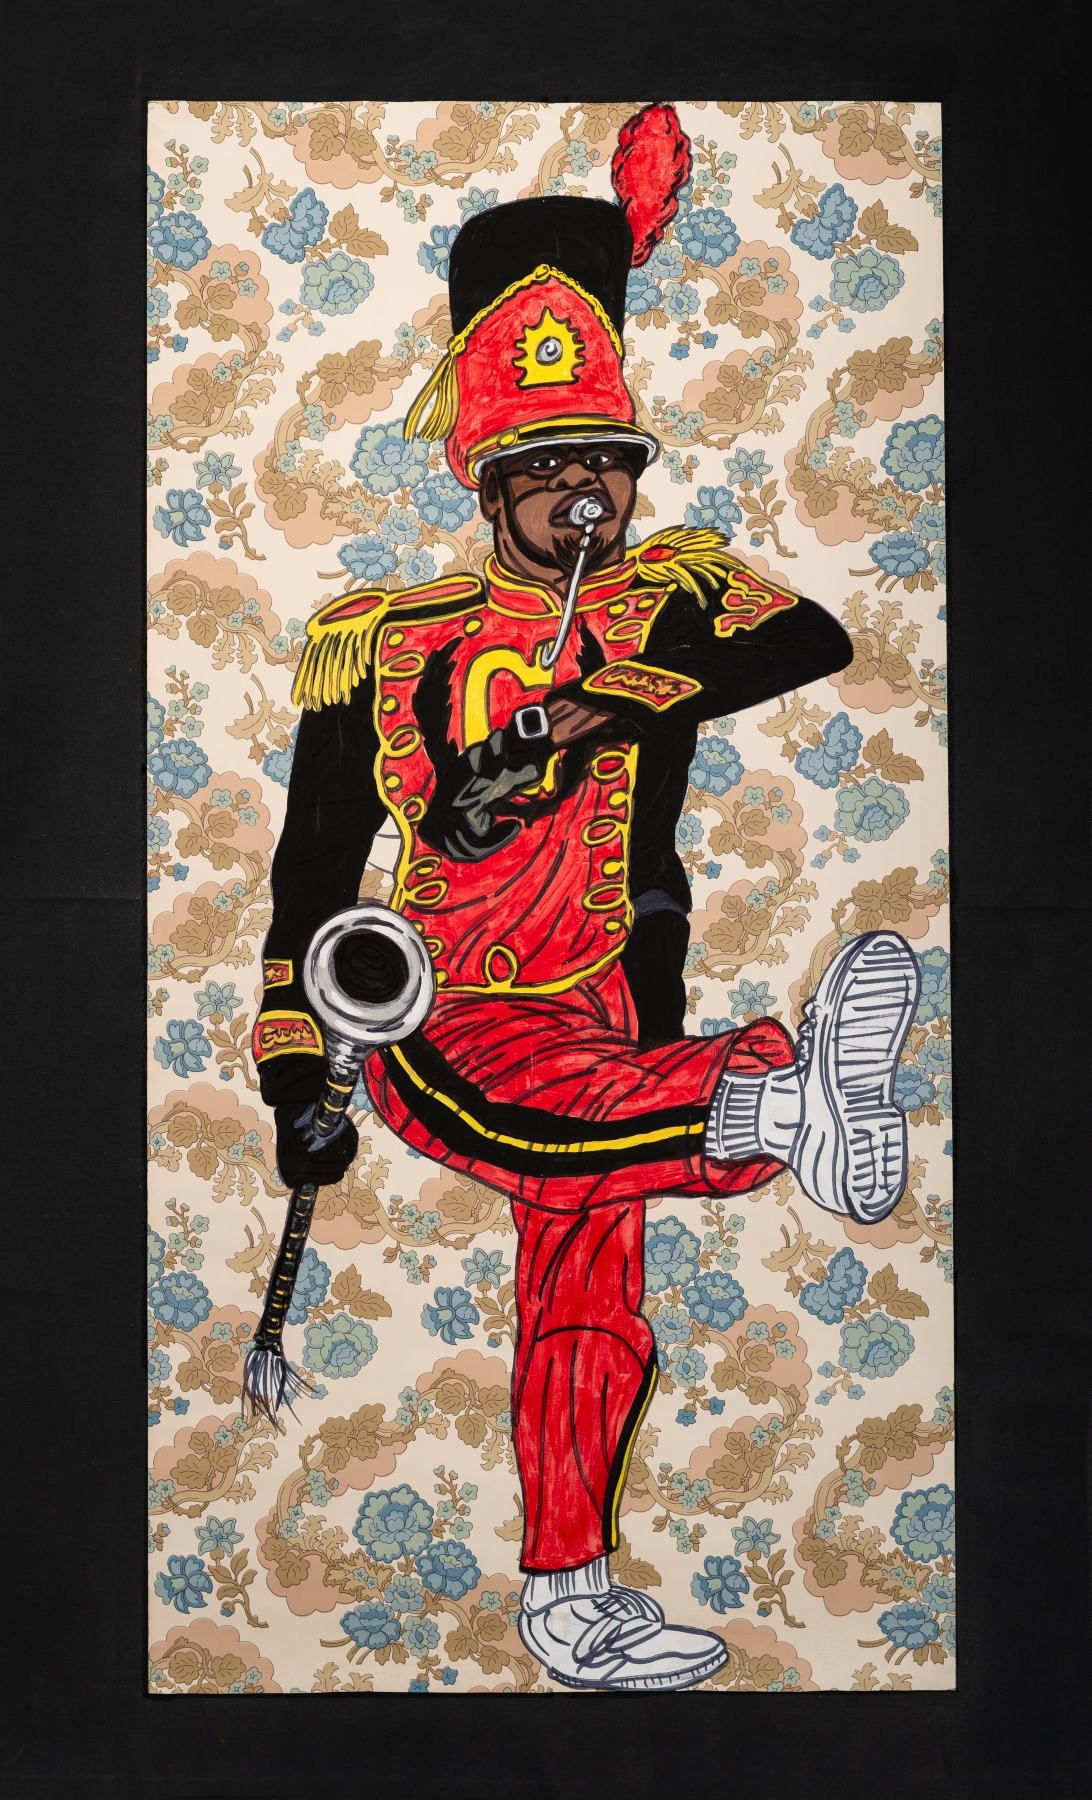 Keith Duncan, Grambling State University Drum Major 4, 2020
61 x 37 inches